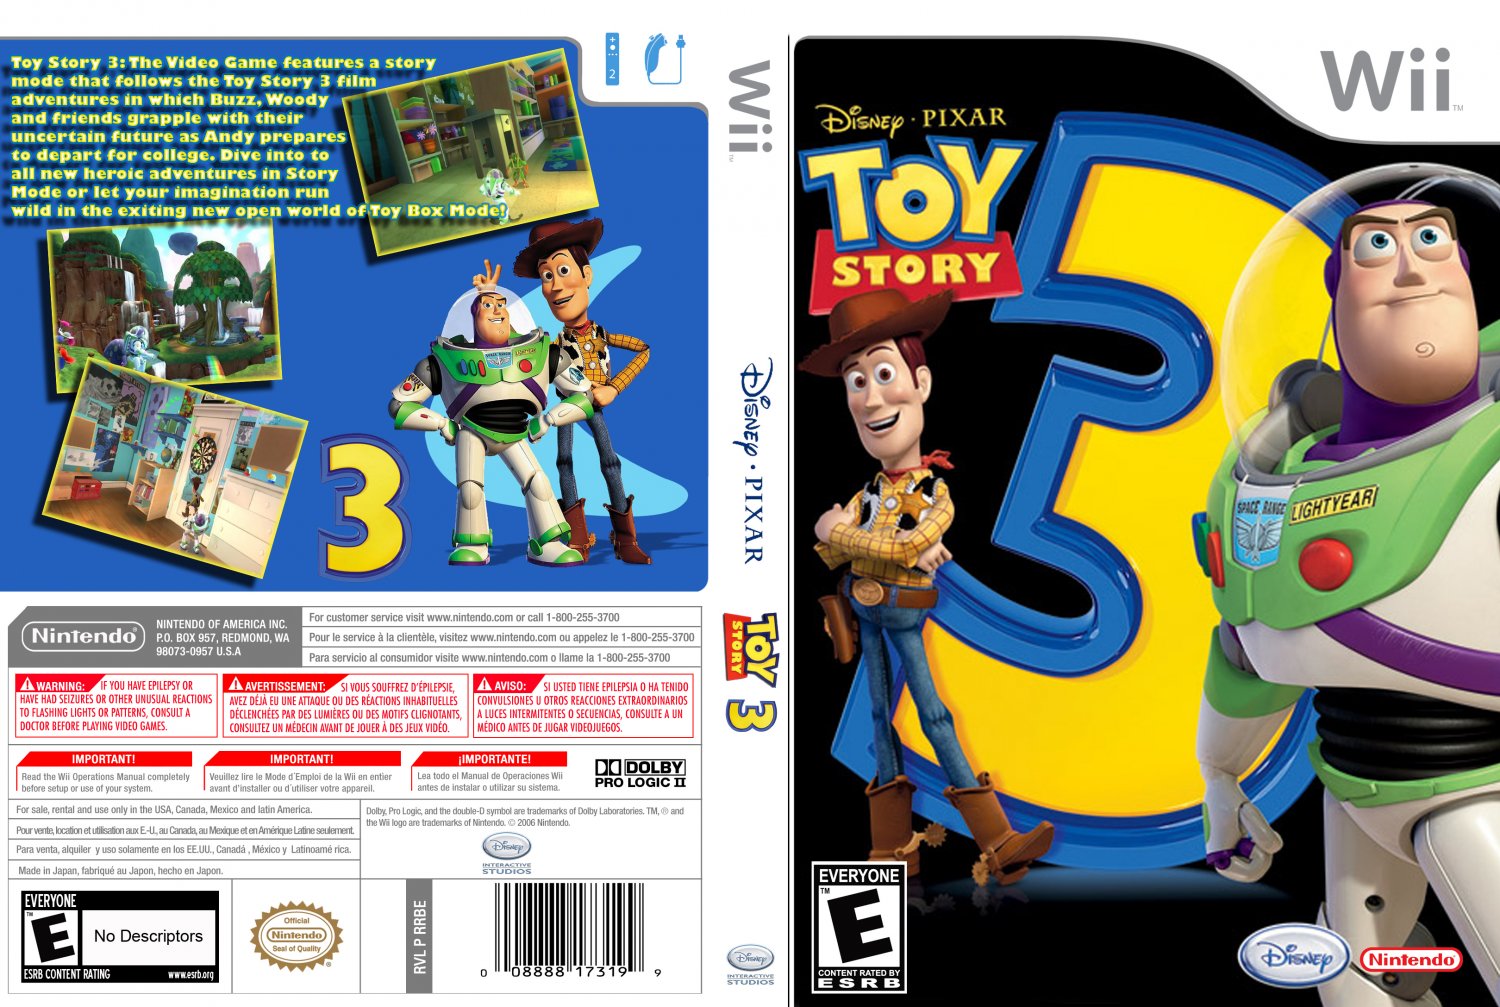 toy-story-3-nintendo-wii-game-covers-toy-story-3-dvd-ntsc-custom-f-dvd-covers